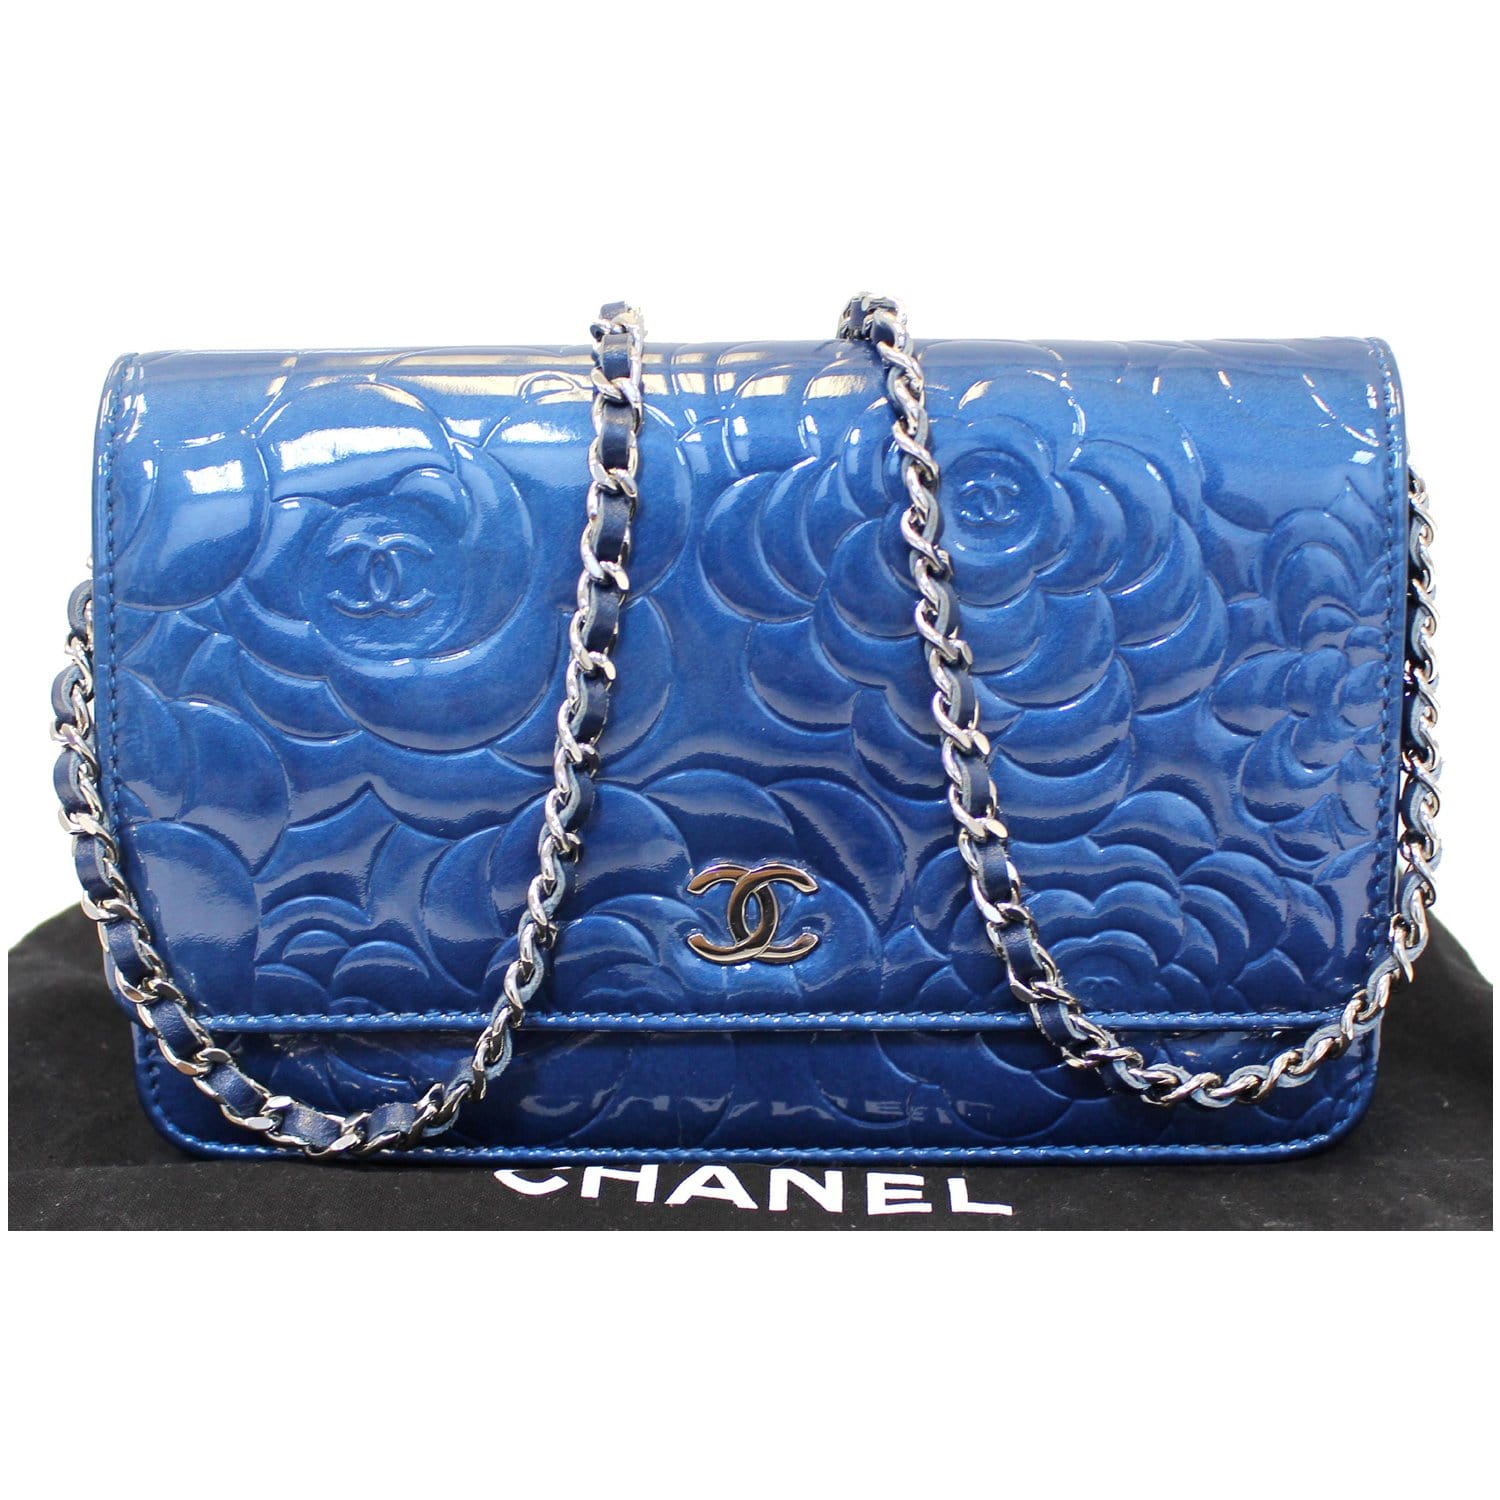 Review of my Chanel mini flap in Turquoise Patent Leather 